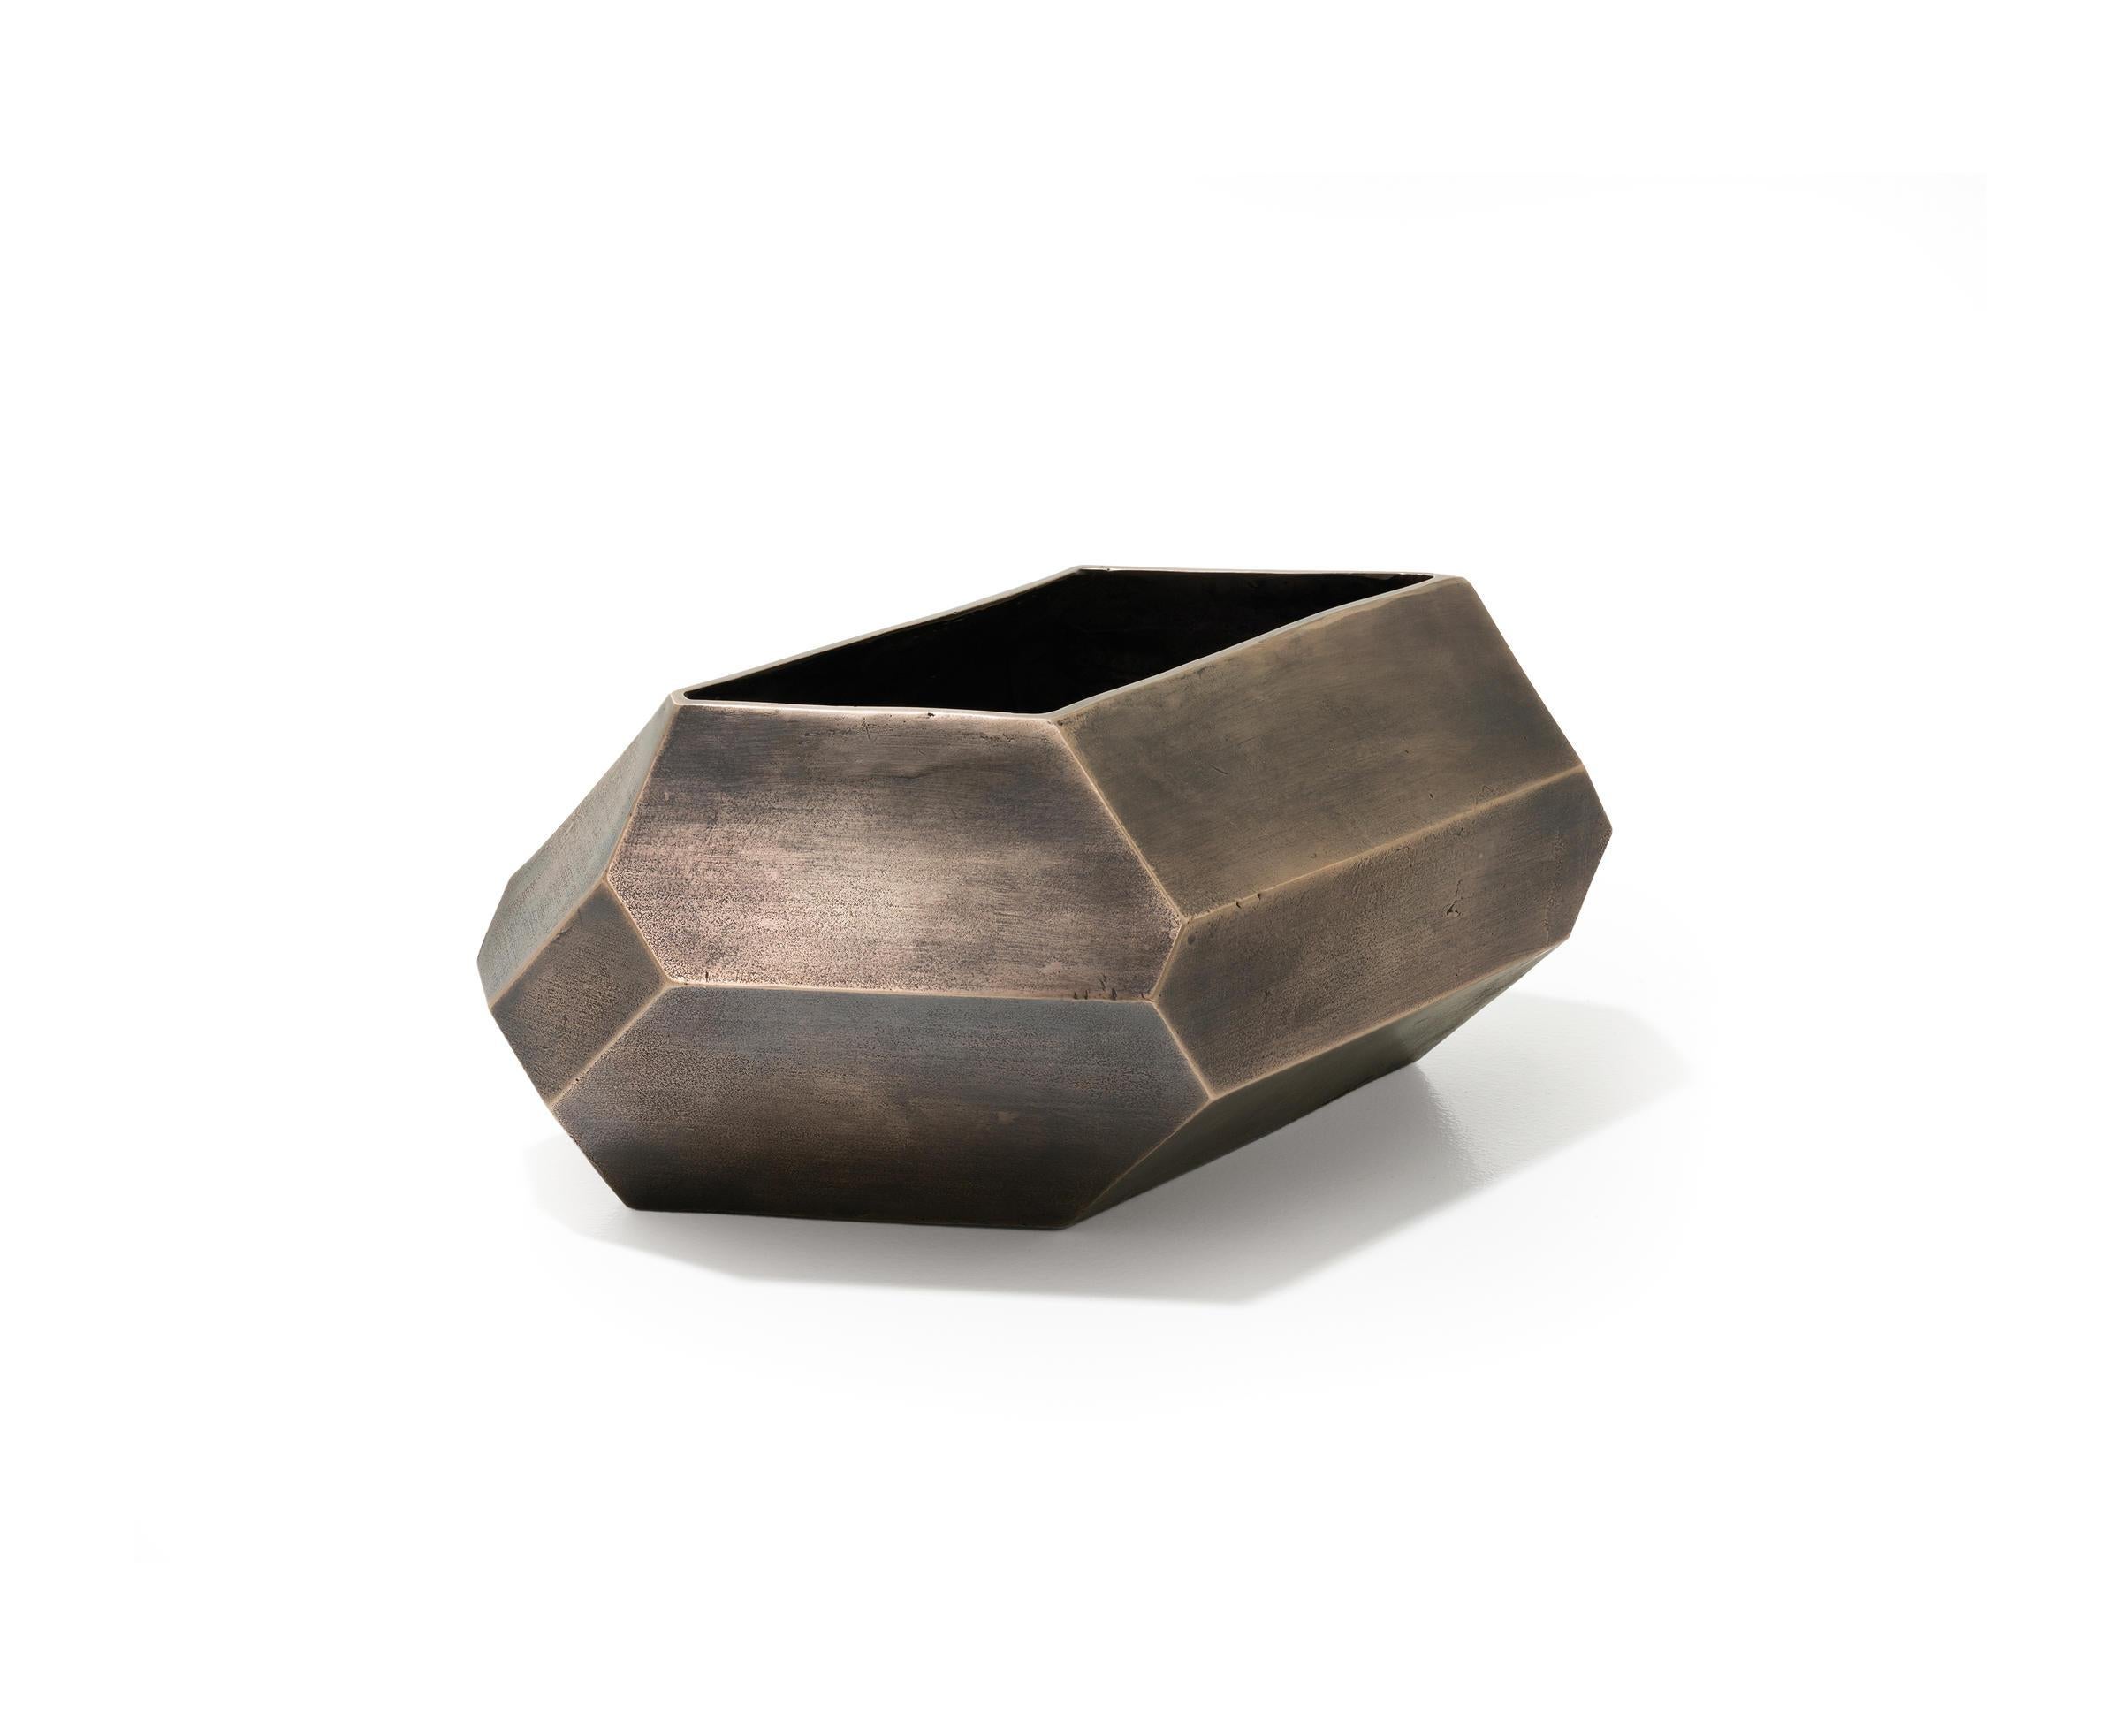 Holly Hunt Faceted block horizontal vase in bronze by Stefan Gulassa

Faceted Block Vase Horizontal

Stefan Gulassa was born the youngest of six in a highly creative family that continues to influence his work. After studying Industrial Design